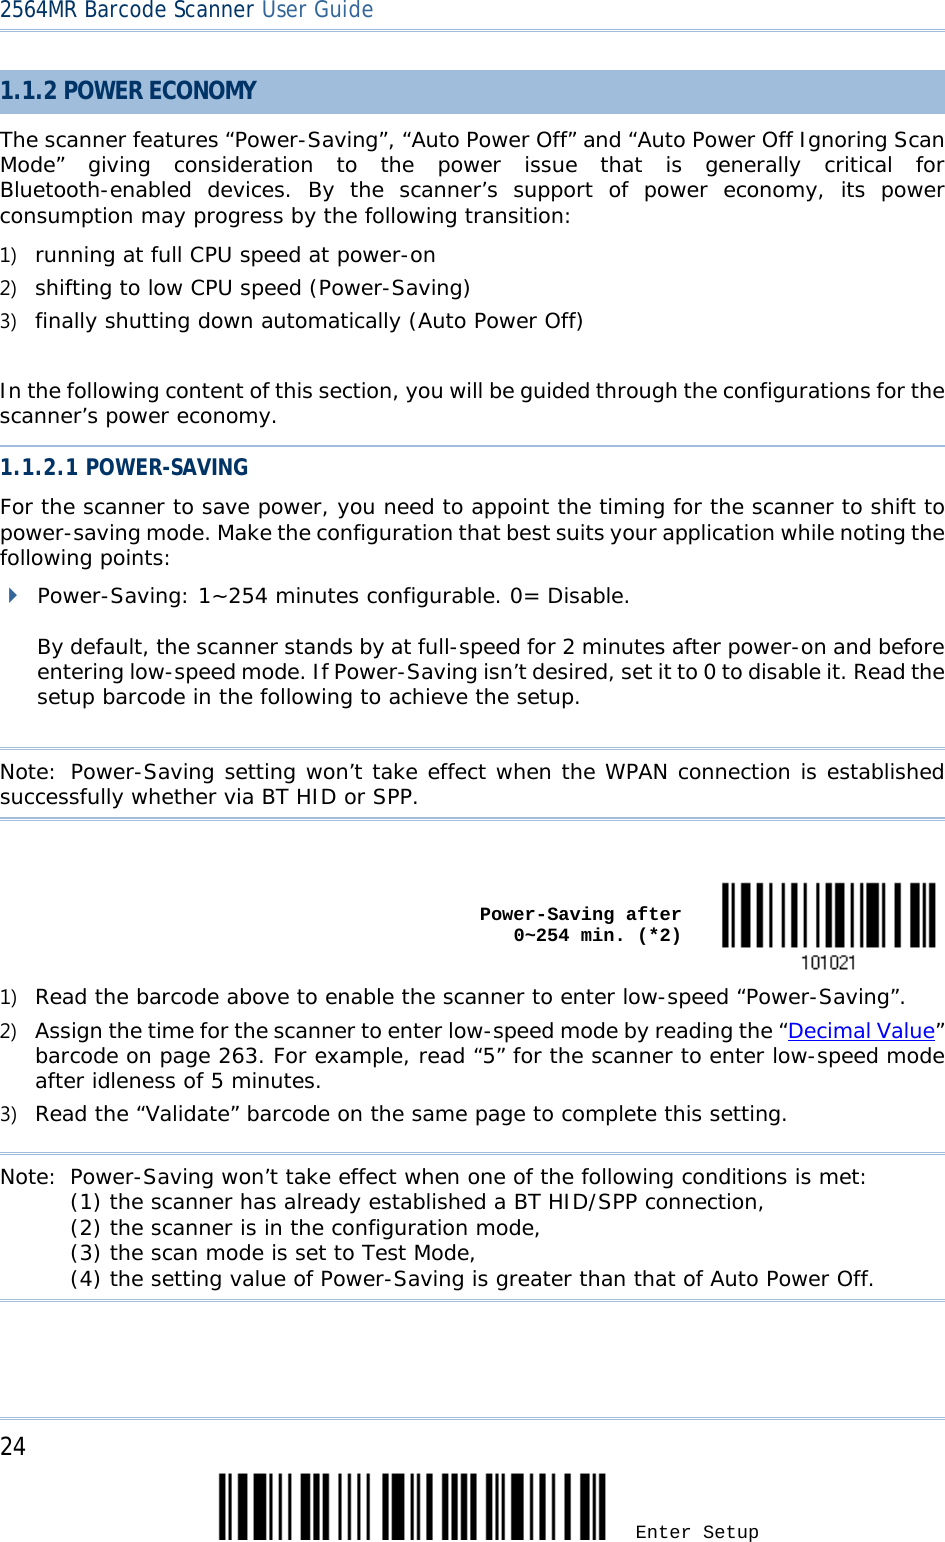 2564MR Barcode Scanner User Guide  1.1.2 POWER ECONOMY The scanner features “Power-Saving”, “Auto Power Off” and “Auto Power Off Ignoring Scan Mode”  giving consideration to the power issue that is generally critical for Bluetooth-enabled devices.  By the scanner’s support of power economy,  its  power consumption may progress by the following transition: 1) running at full CPU speed at power-on 2) shifting to low CPU speed (Power-Saving) 3) finally shutting down automatically (Auto Power Off)  In the following content of this section, you will be guided through the configurations for the scanner’s power economy. 1.1.2.1 POWER-SAVING For the scanner to save power, you need to appoint the timing for the scanner to shift to power-saving mode. Make the configuration that best suits your application while noting the following points:  Power-Saving: 1~254 minutes configurable. 0= Disable.  By default, the scanner stands by at full-speed for 2 minutes after power-on and before entering low-speed mode. If Power-Saving isn’t desired, set it to 0 to disable it. Read the setup barcode in the following to achieve the setup.  Note: Power-Saving setting won’t take effect when the WPAN connection is established successfully whether via BT HID or SPP.     Power-Saving after            0~254 min. (*2)  1) Read the barcode above to enable the scanner to enter low-speed “Power-Saving”. 2) Assign the time for the scanner to enter low-speed mode by reading the “Decimal Value” barcode on page 263. For example, read “5” for the scanner to enter low-speed mode after idleness of 5 minutes.  3) Read the “Validate” barcode on the same page to complete this setting.    Note: Power-Saving won’t take effect when one of the following conditions is met: (1) the scanner has already established a BT HID/SPP connection, (2) the scanner is in the configuration mode, (3) the scan mode is set to Test Mode, (4) the setting value of Power-Saving is greater than that of Auto Power Off.     24 Enter Setup 